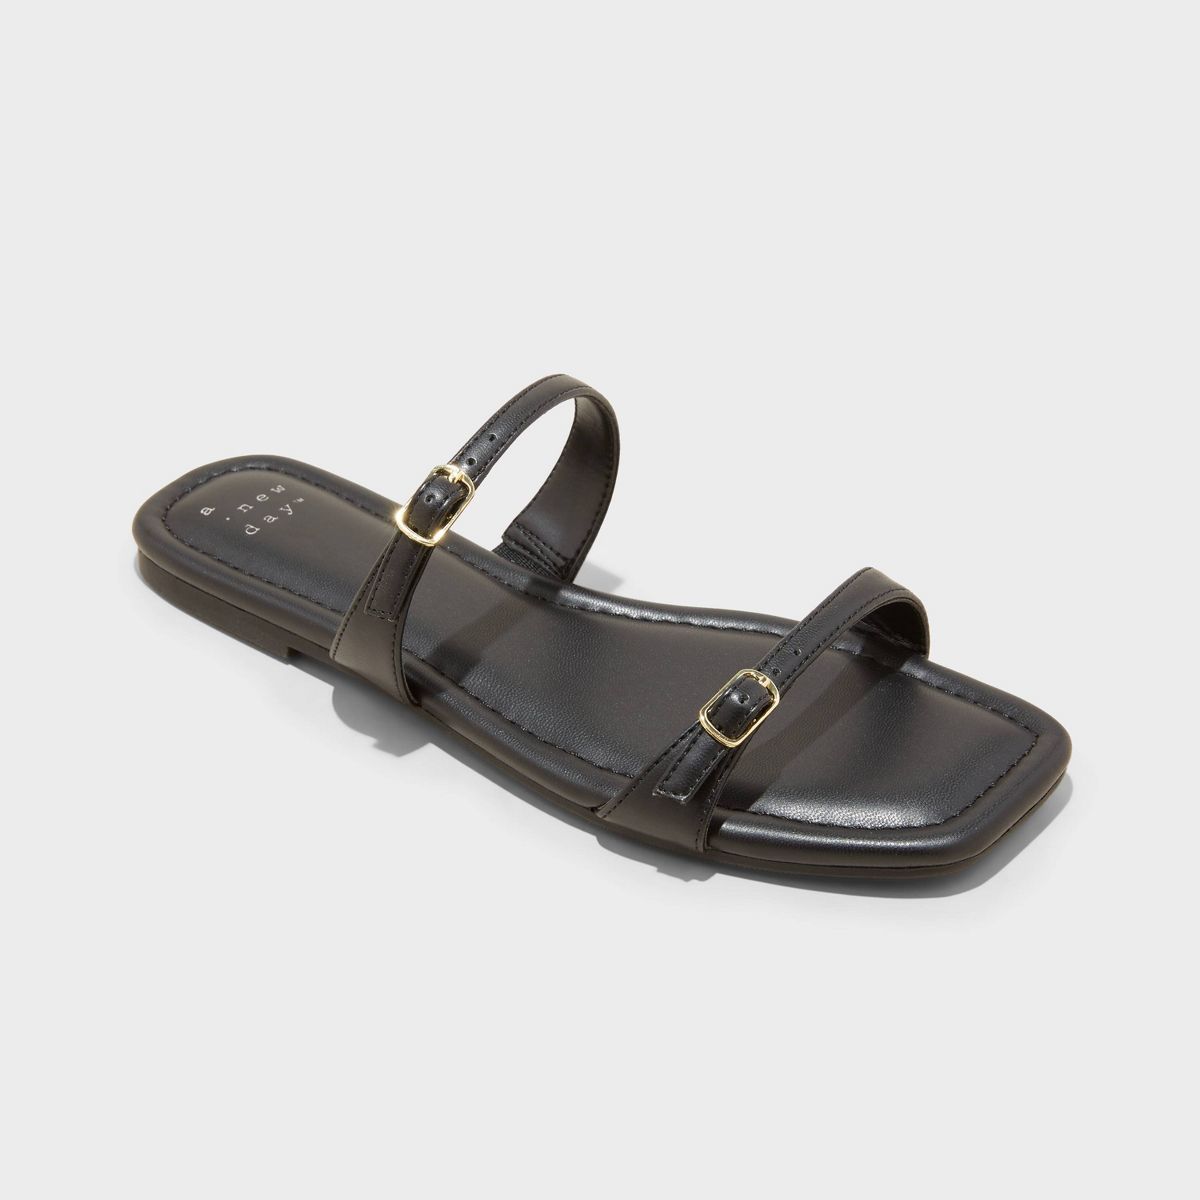 Women's Connie Two Band Buckle Slide Sandals with Memory Foam Insole - A New Day™ Black 7.5 | Target